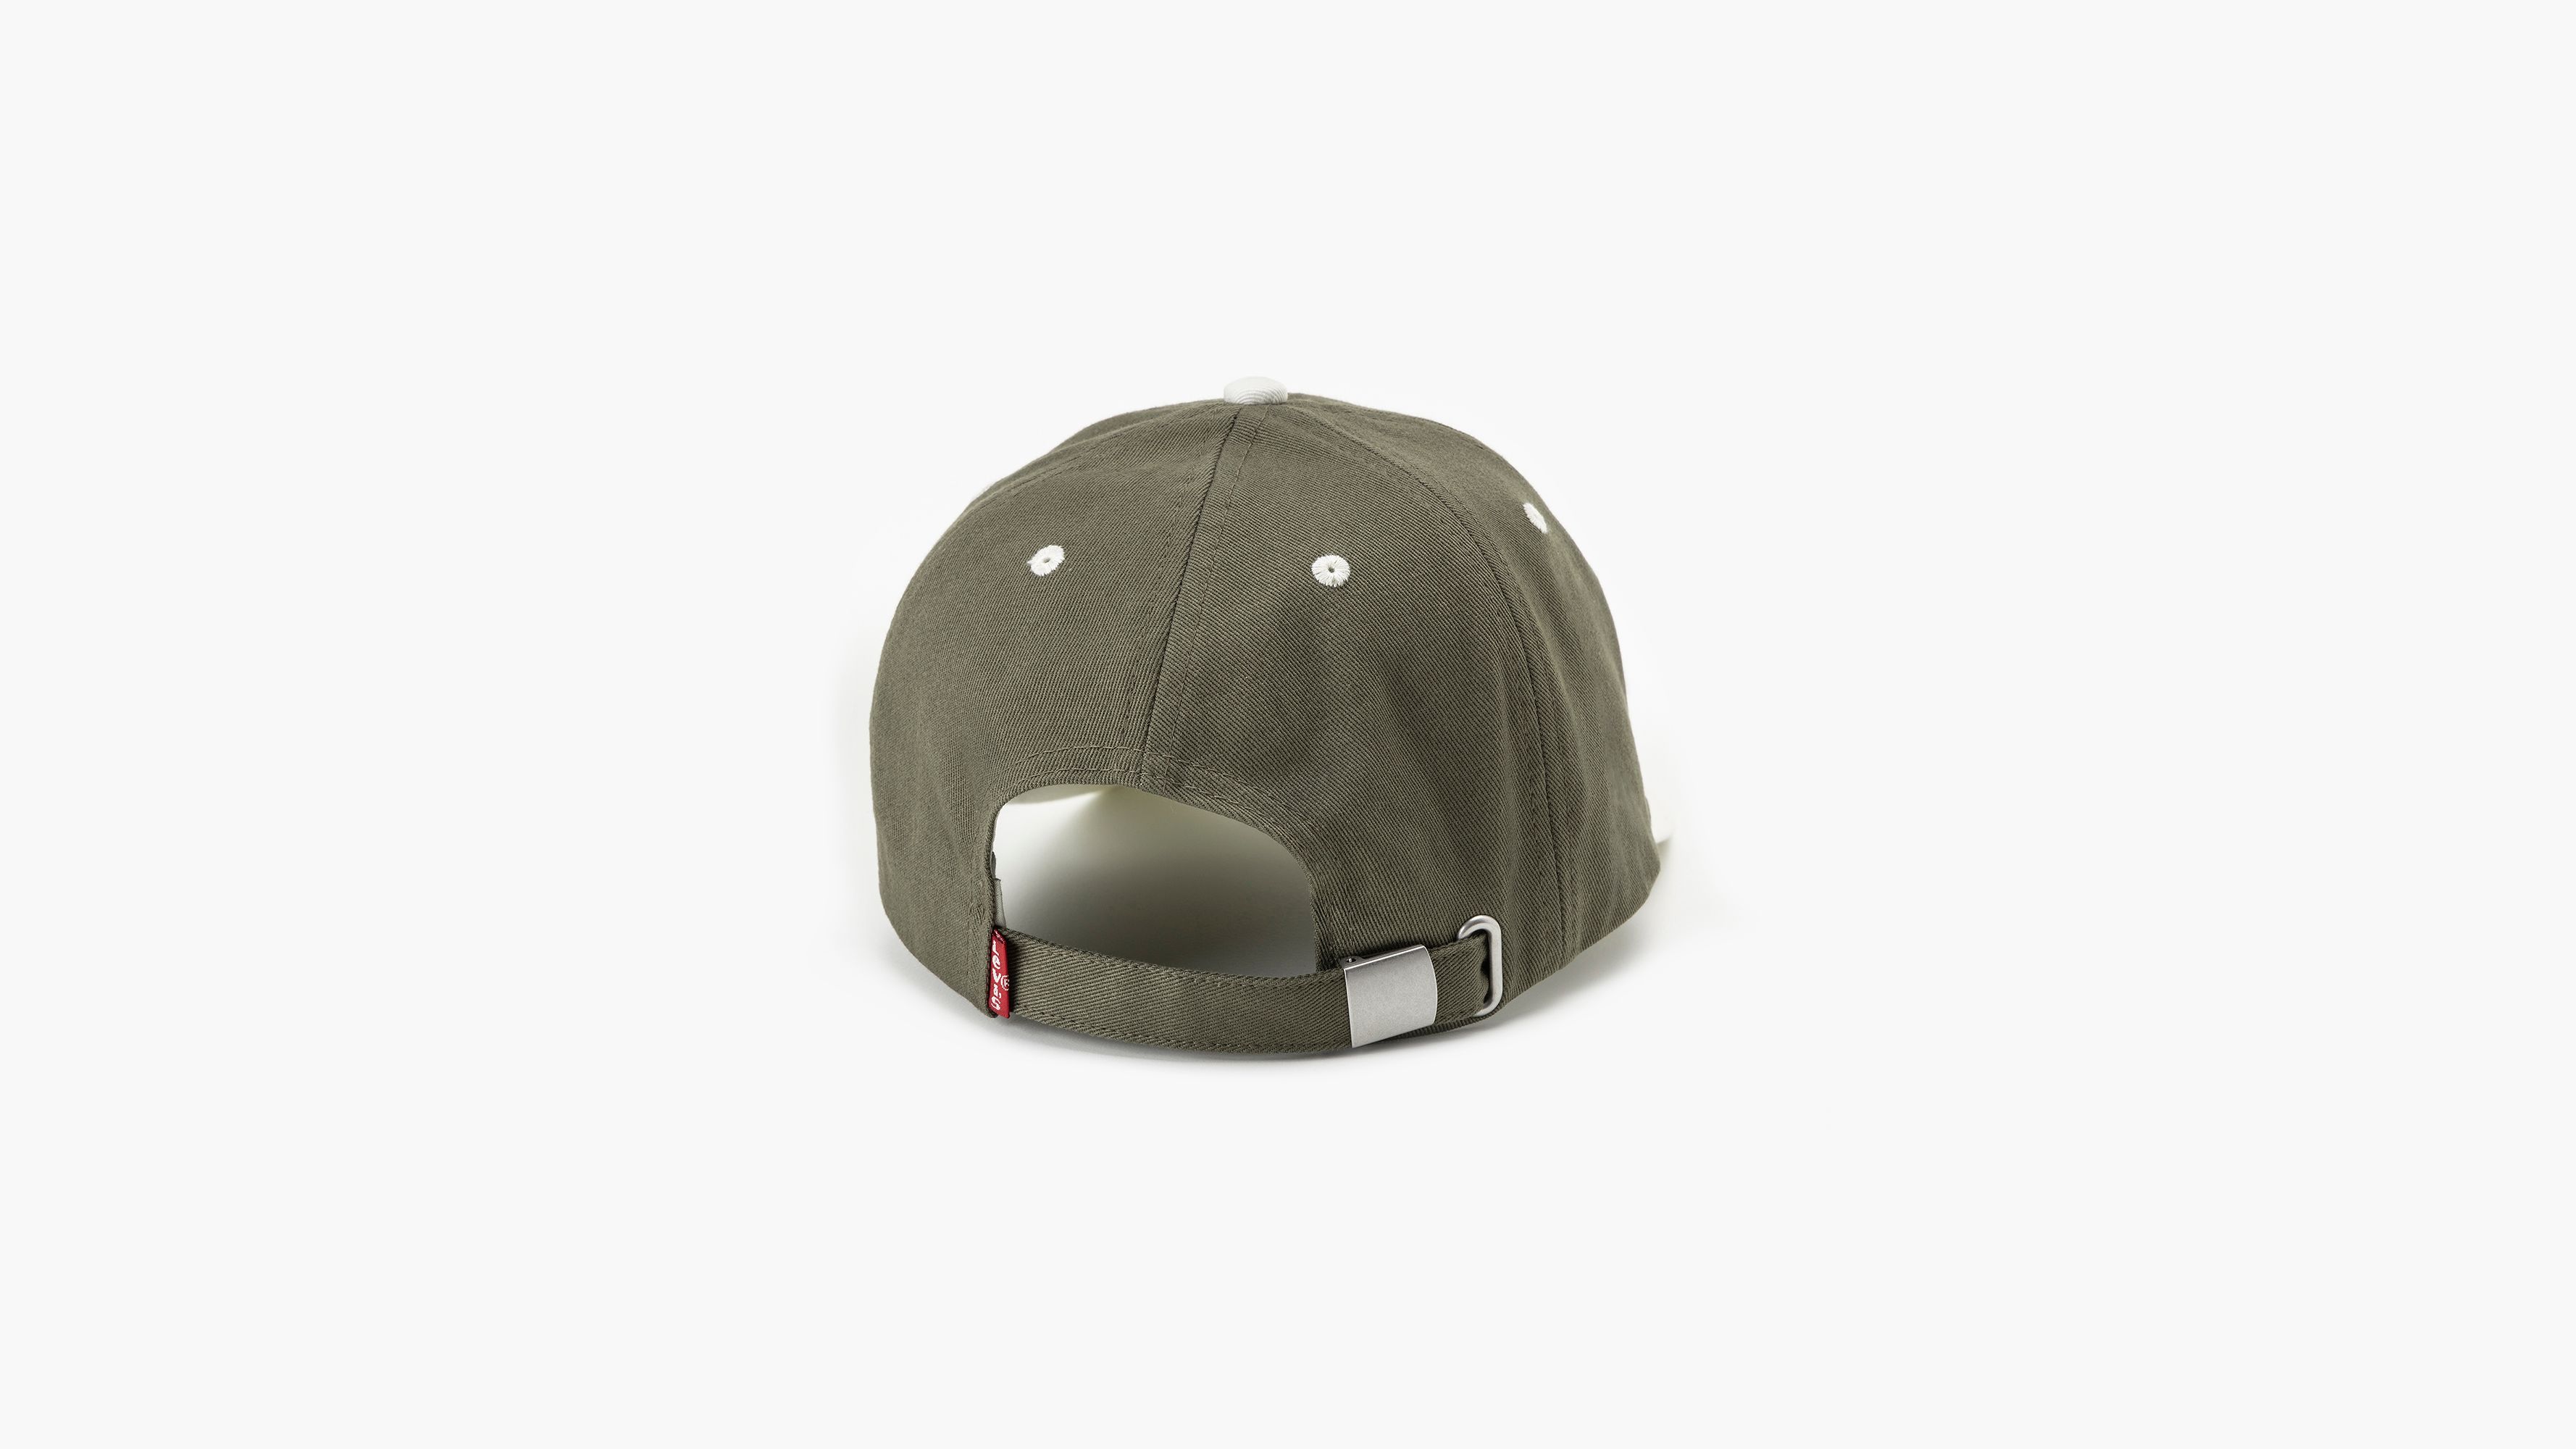 Relaxed Dad Heritage Cap